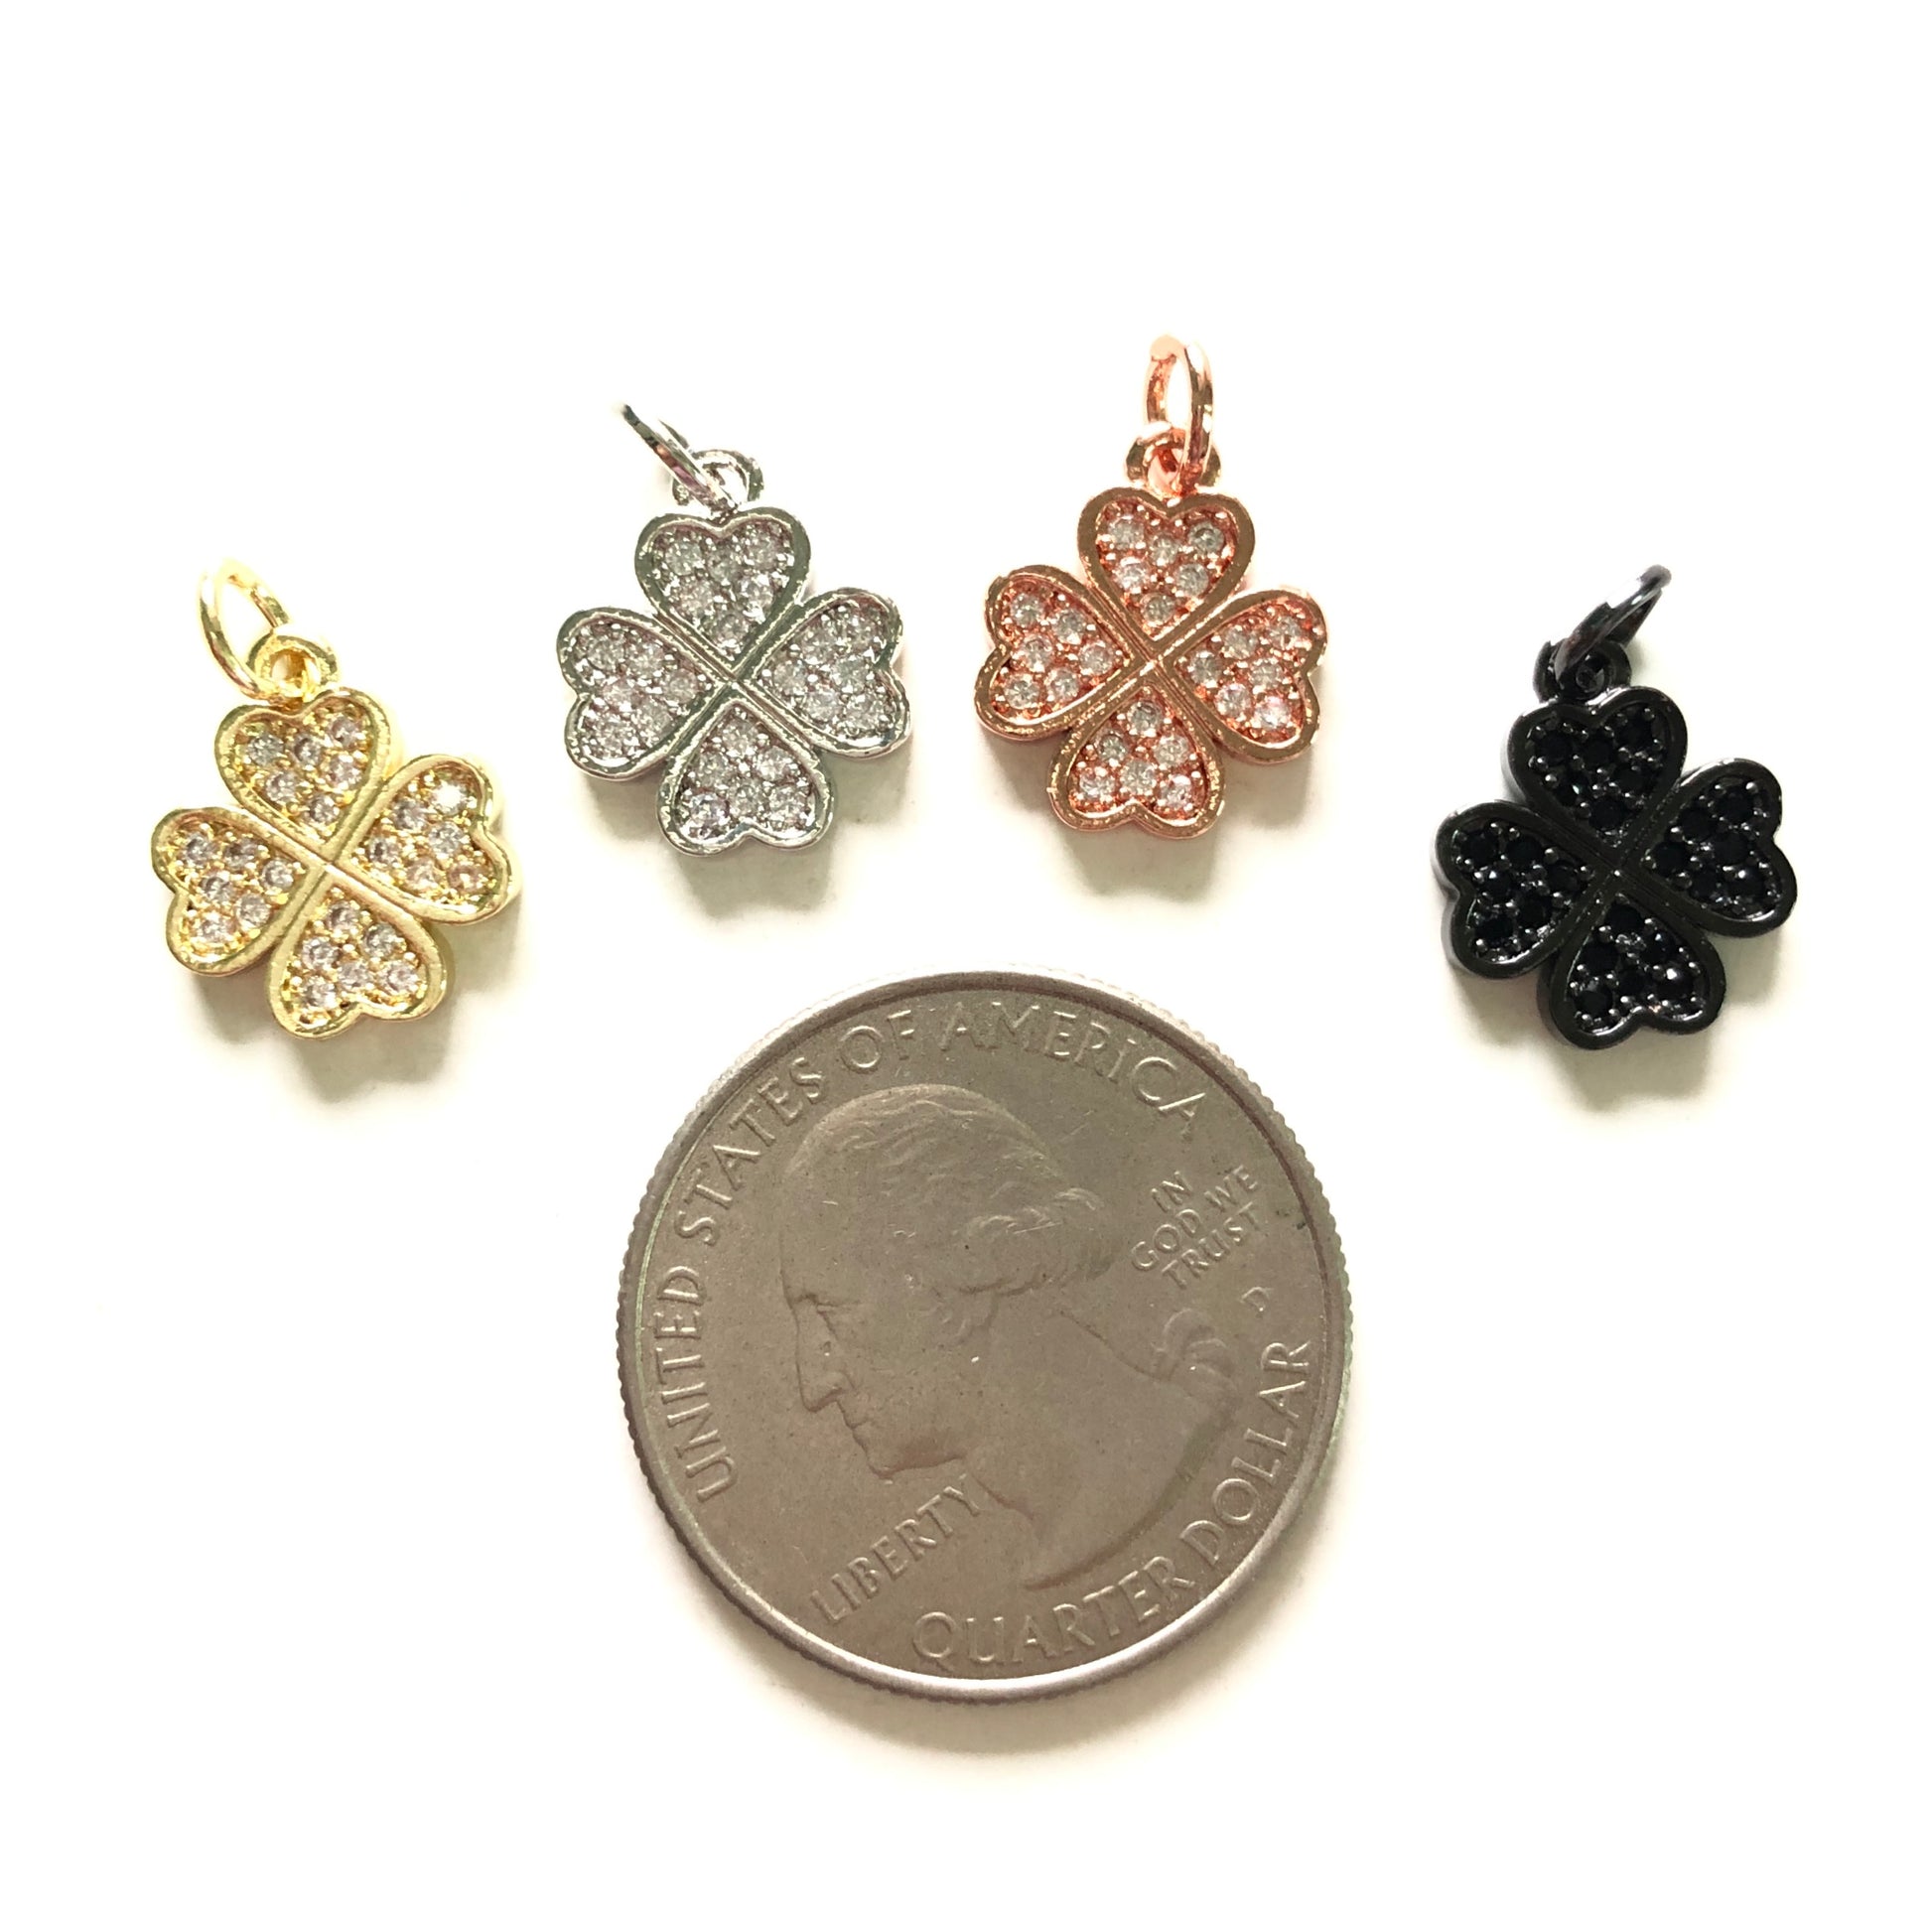 10pcs/lot 14*12mm Small Size CZ Pave Four Leaf Clover Charms CZ Paved Charms Flowers Small Sizes Charms Beads Beyond